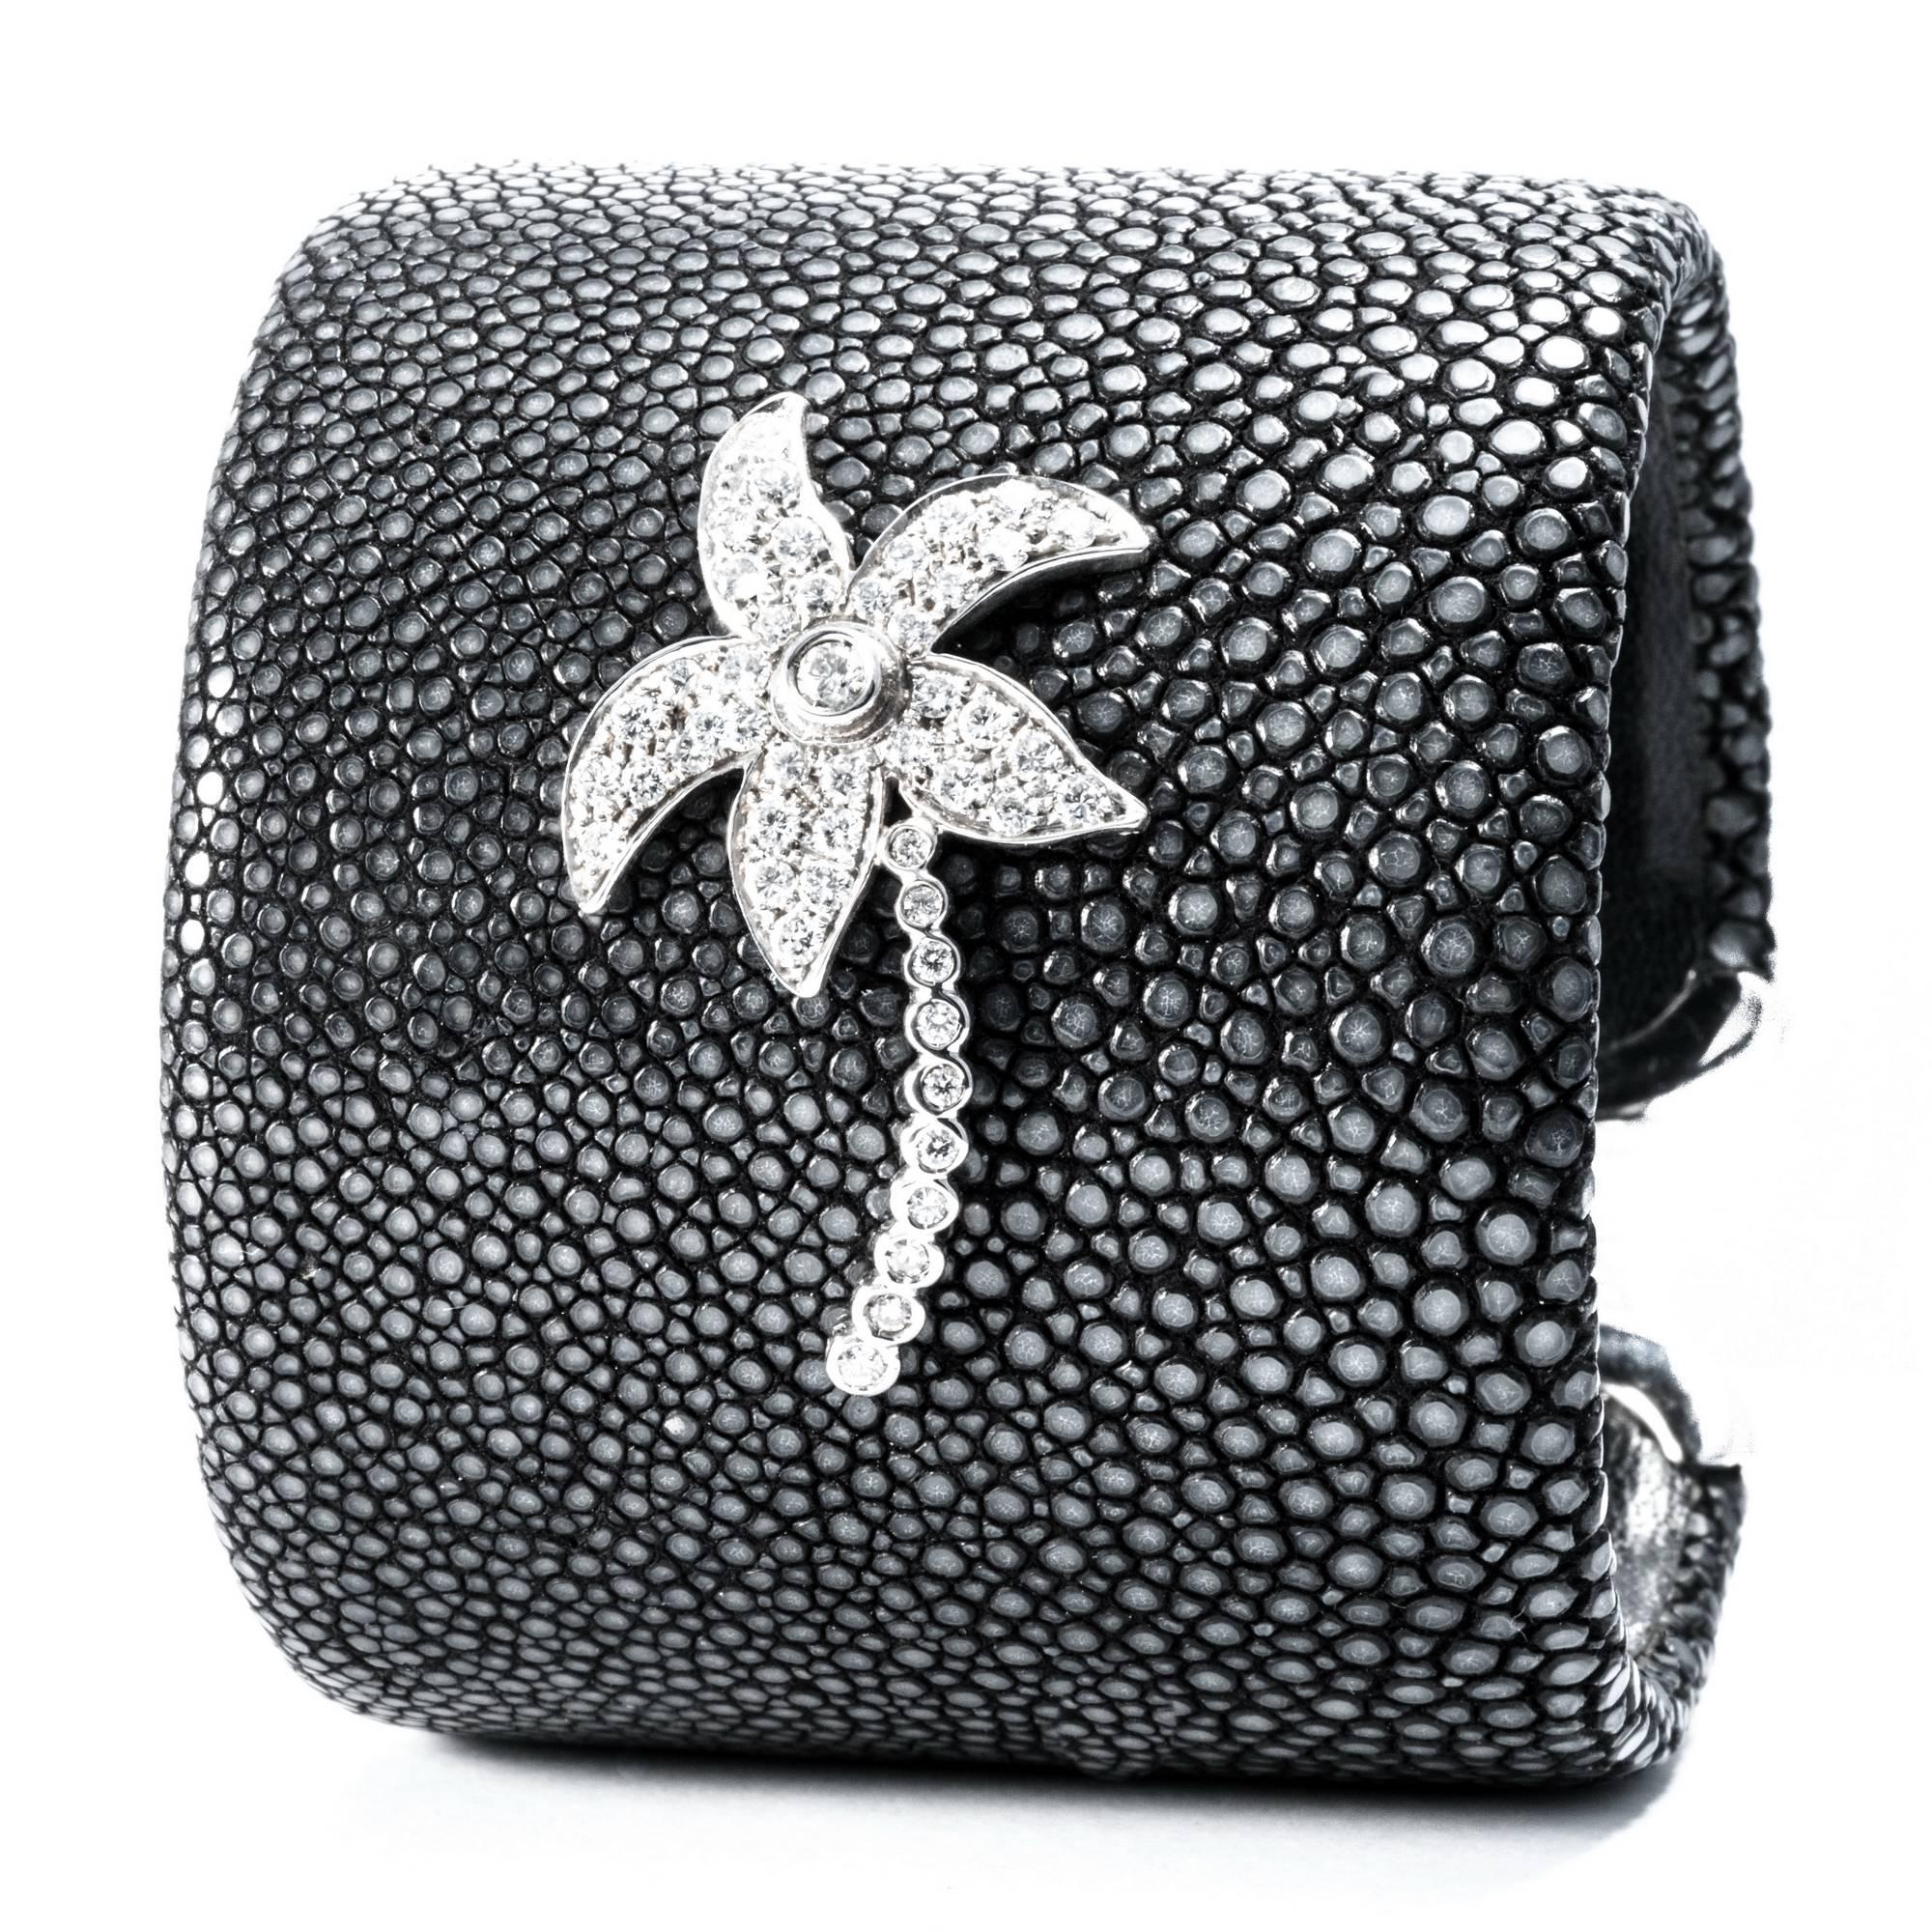 Shagreen's deep black granular surface is handcrafted  in a large c-bangle bracelet with  extra-white diamonds to design a lively palm decoration.
With 1 diamond carats 0.05 and 47 diamonds carats 0.95. Set in white gold 18K

Fits wrist size up to